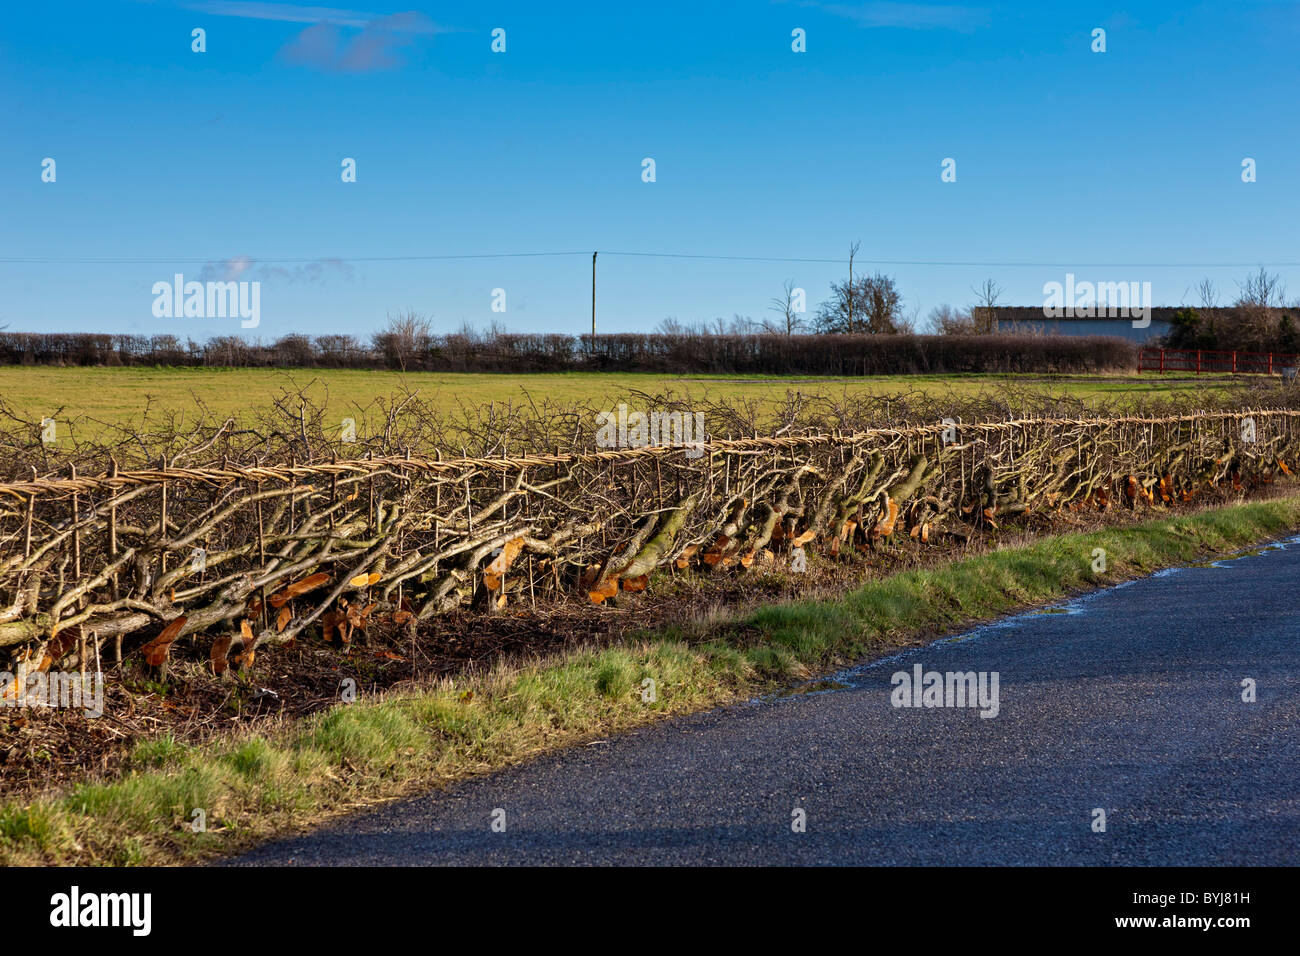 The traditional country craft of Midland Bullock style hedgelaying in rural Oxfordshire England. JMH4880 Stock Photo